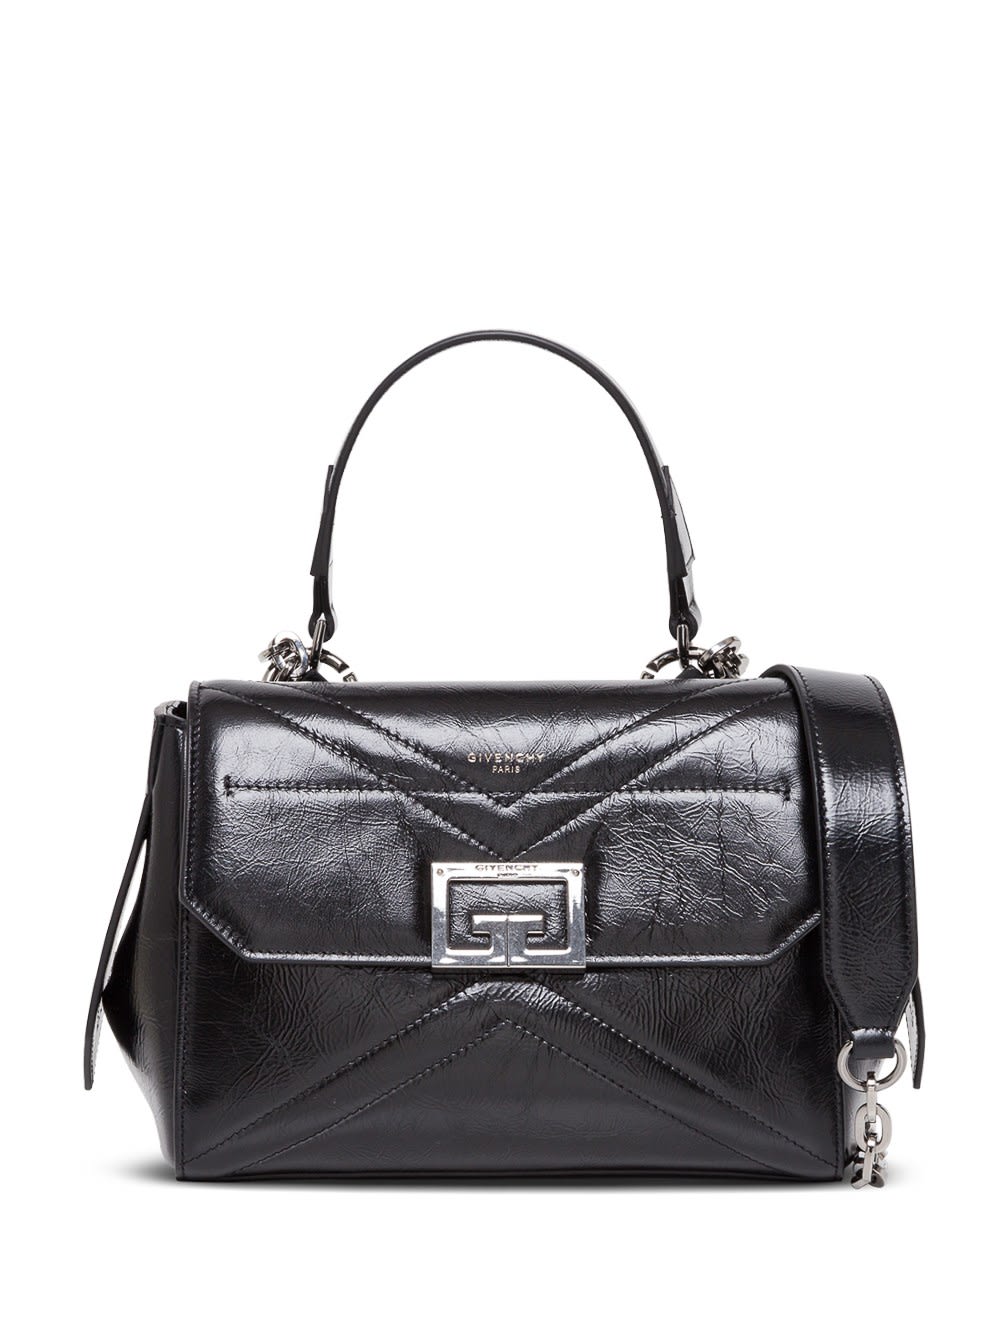 Givenchy Id Flap Small Handbag In Black Leather